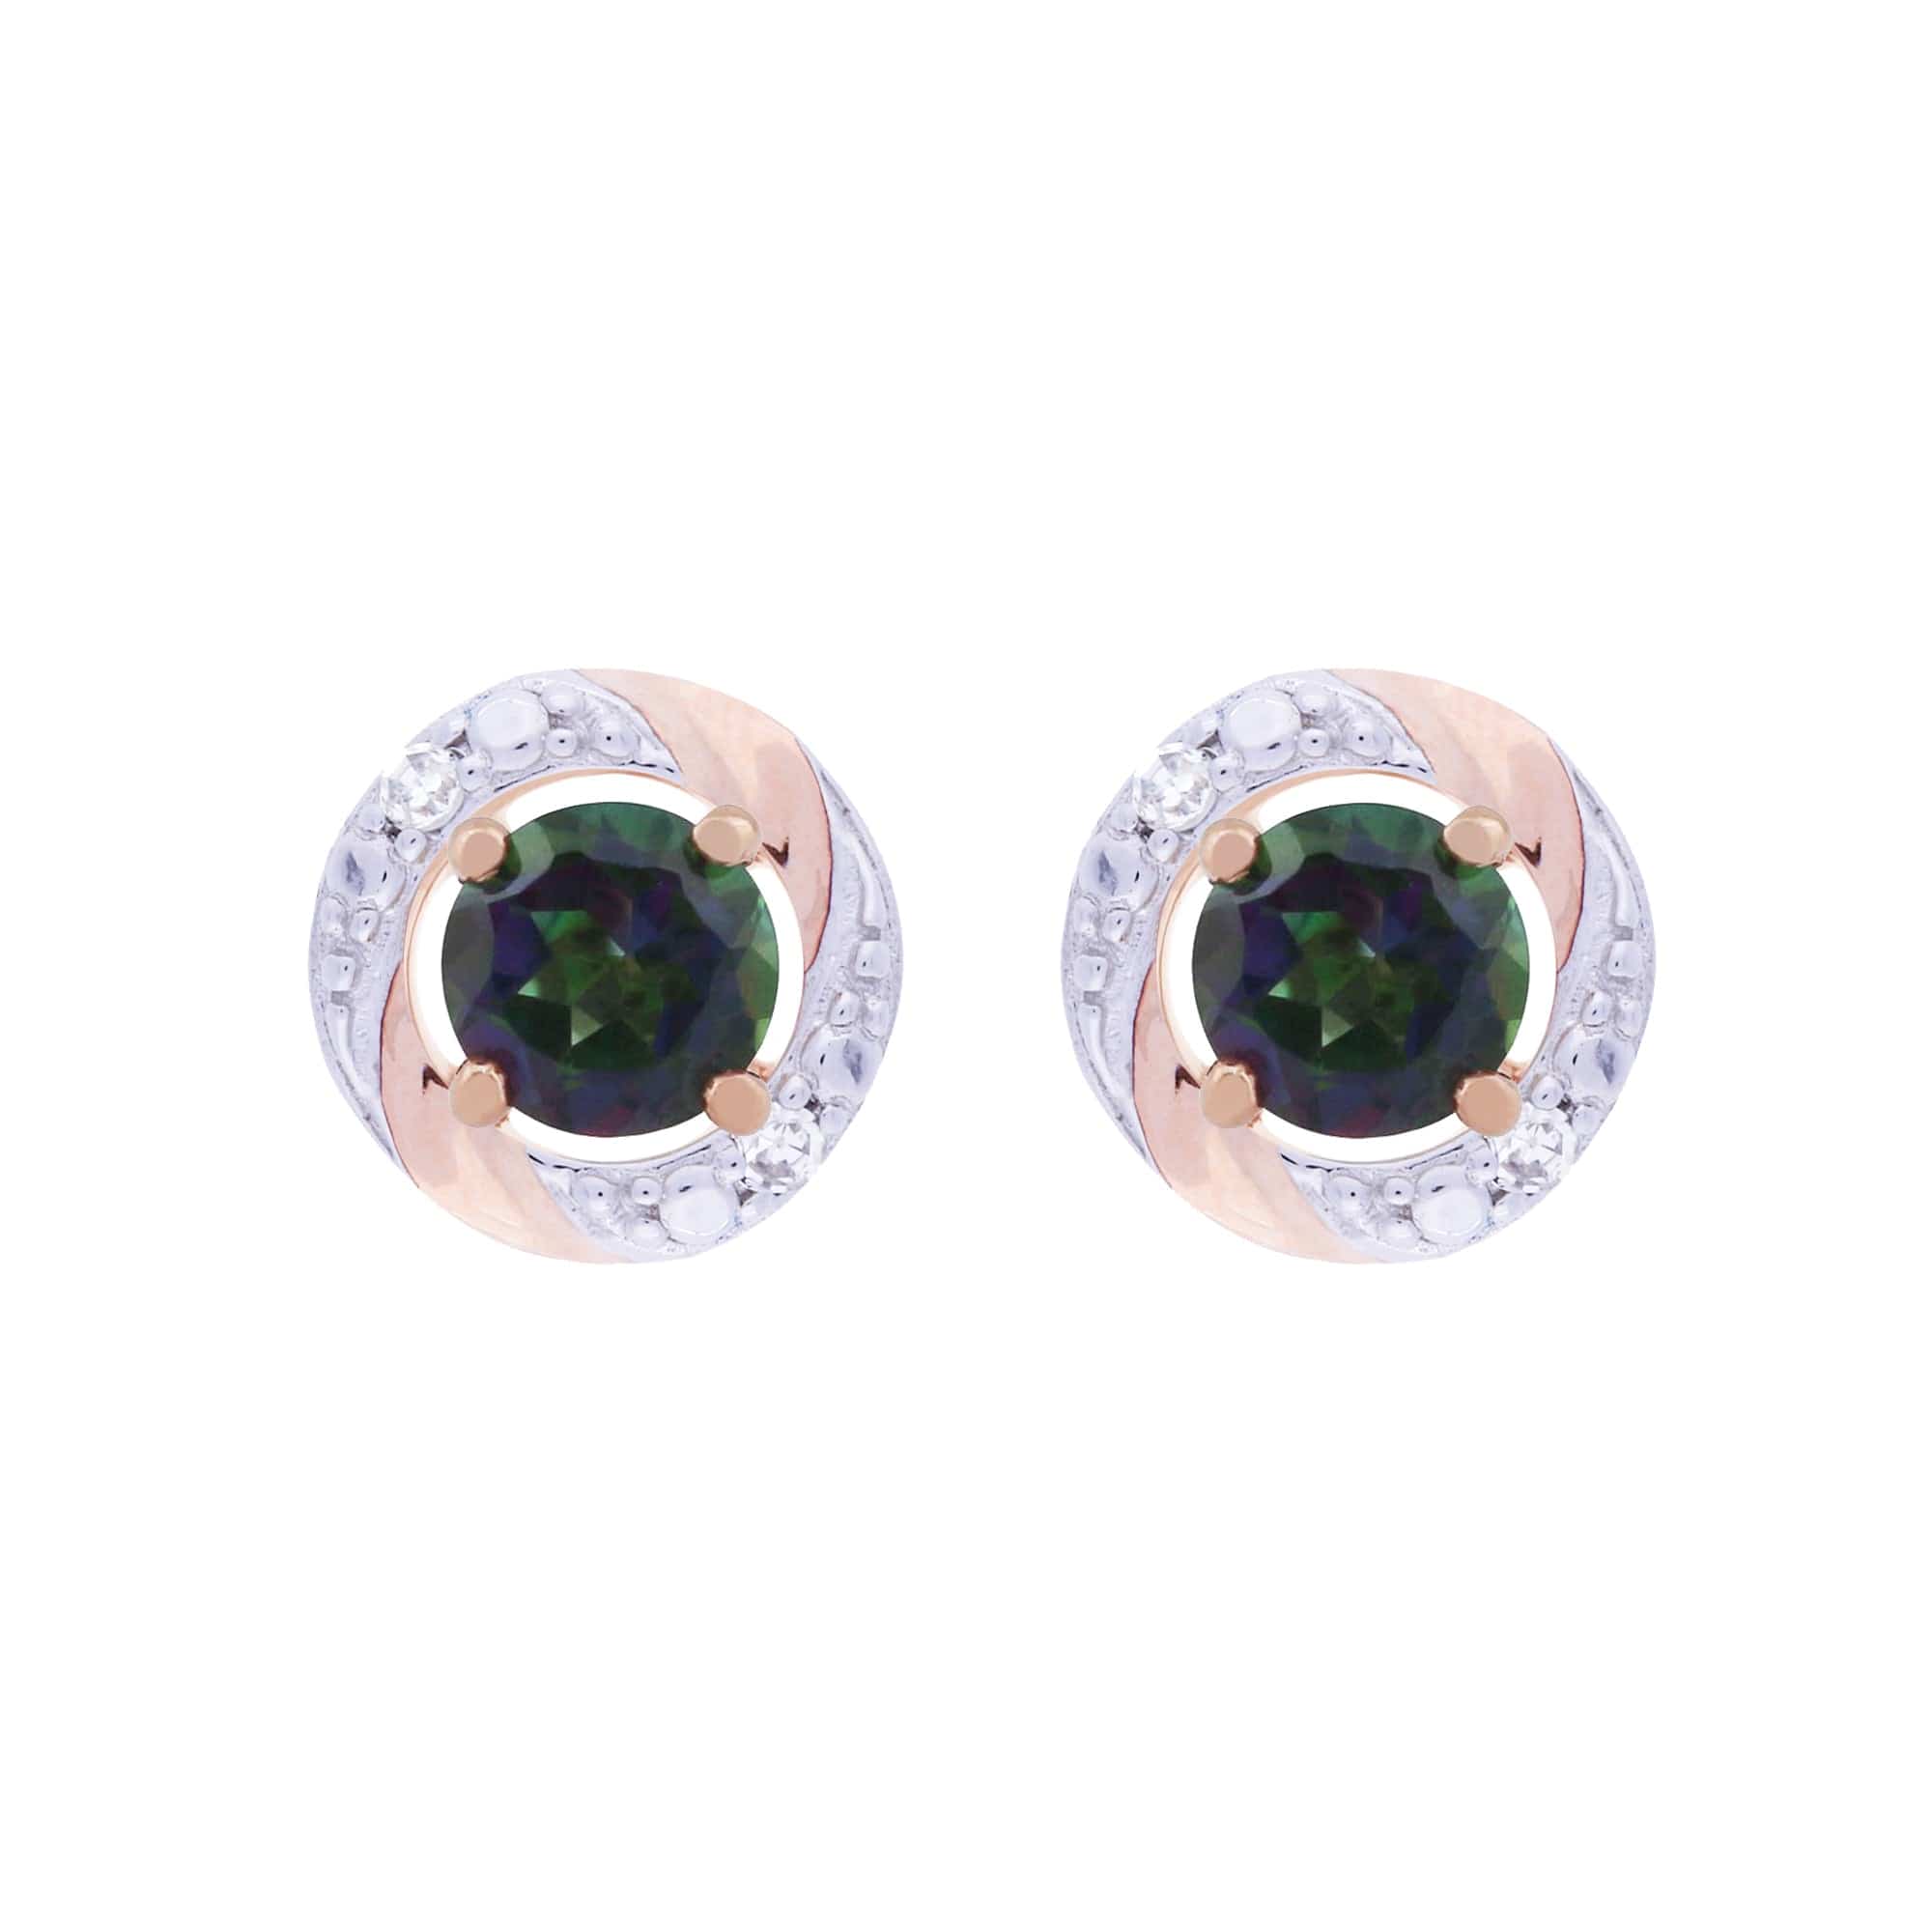 183E4316029-191E0378019 Classic Round Mystic Topaz Stud Earrings with Detachable Diamond Round Earrings Jacket Set in 9ct Rose Gold 1